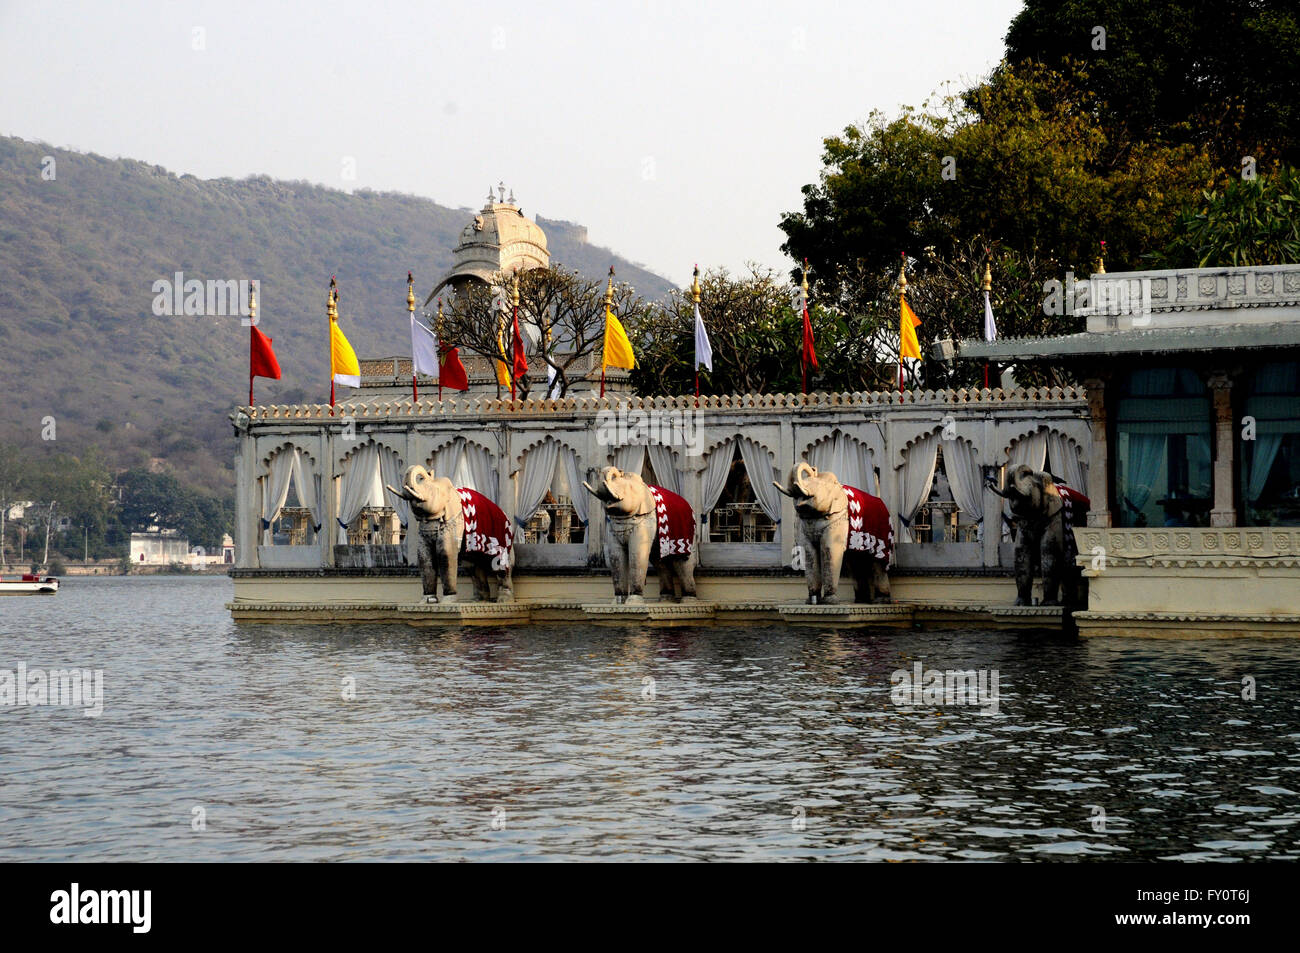 Jag Mandir, or the Lake Garden Palace, is built on an island in Lake Pichola, Udaipur, India. Stock Photo